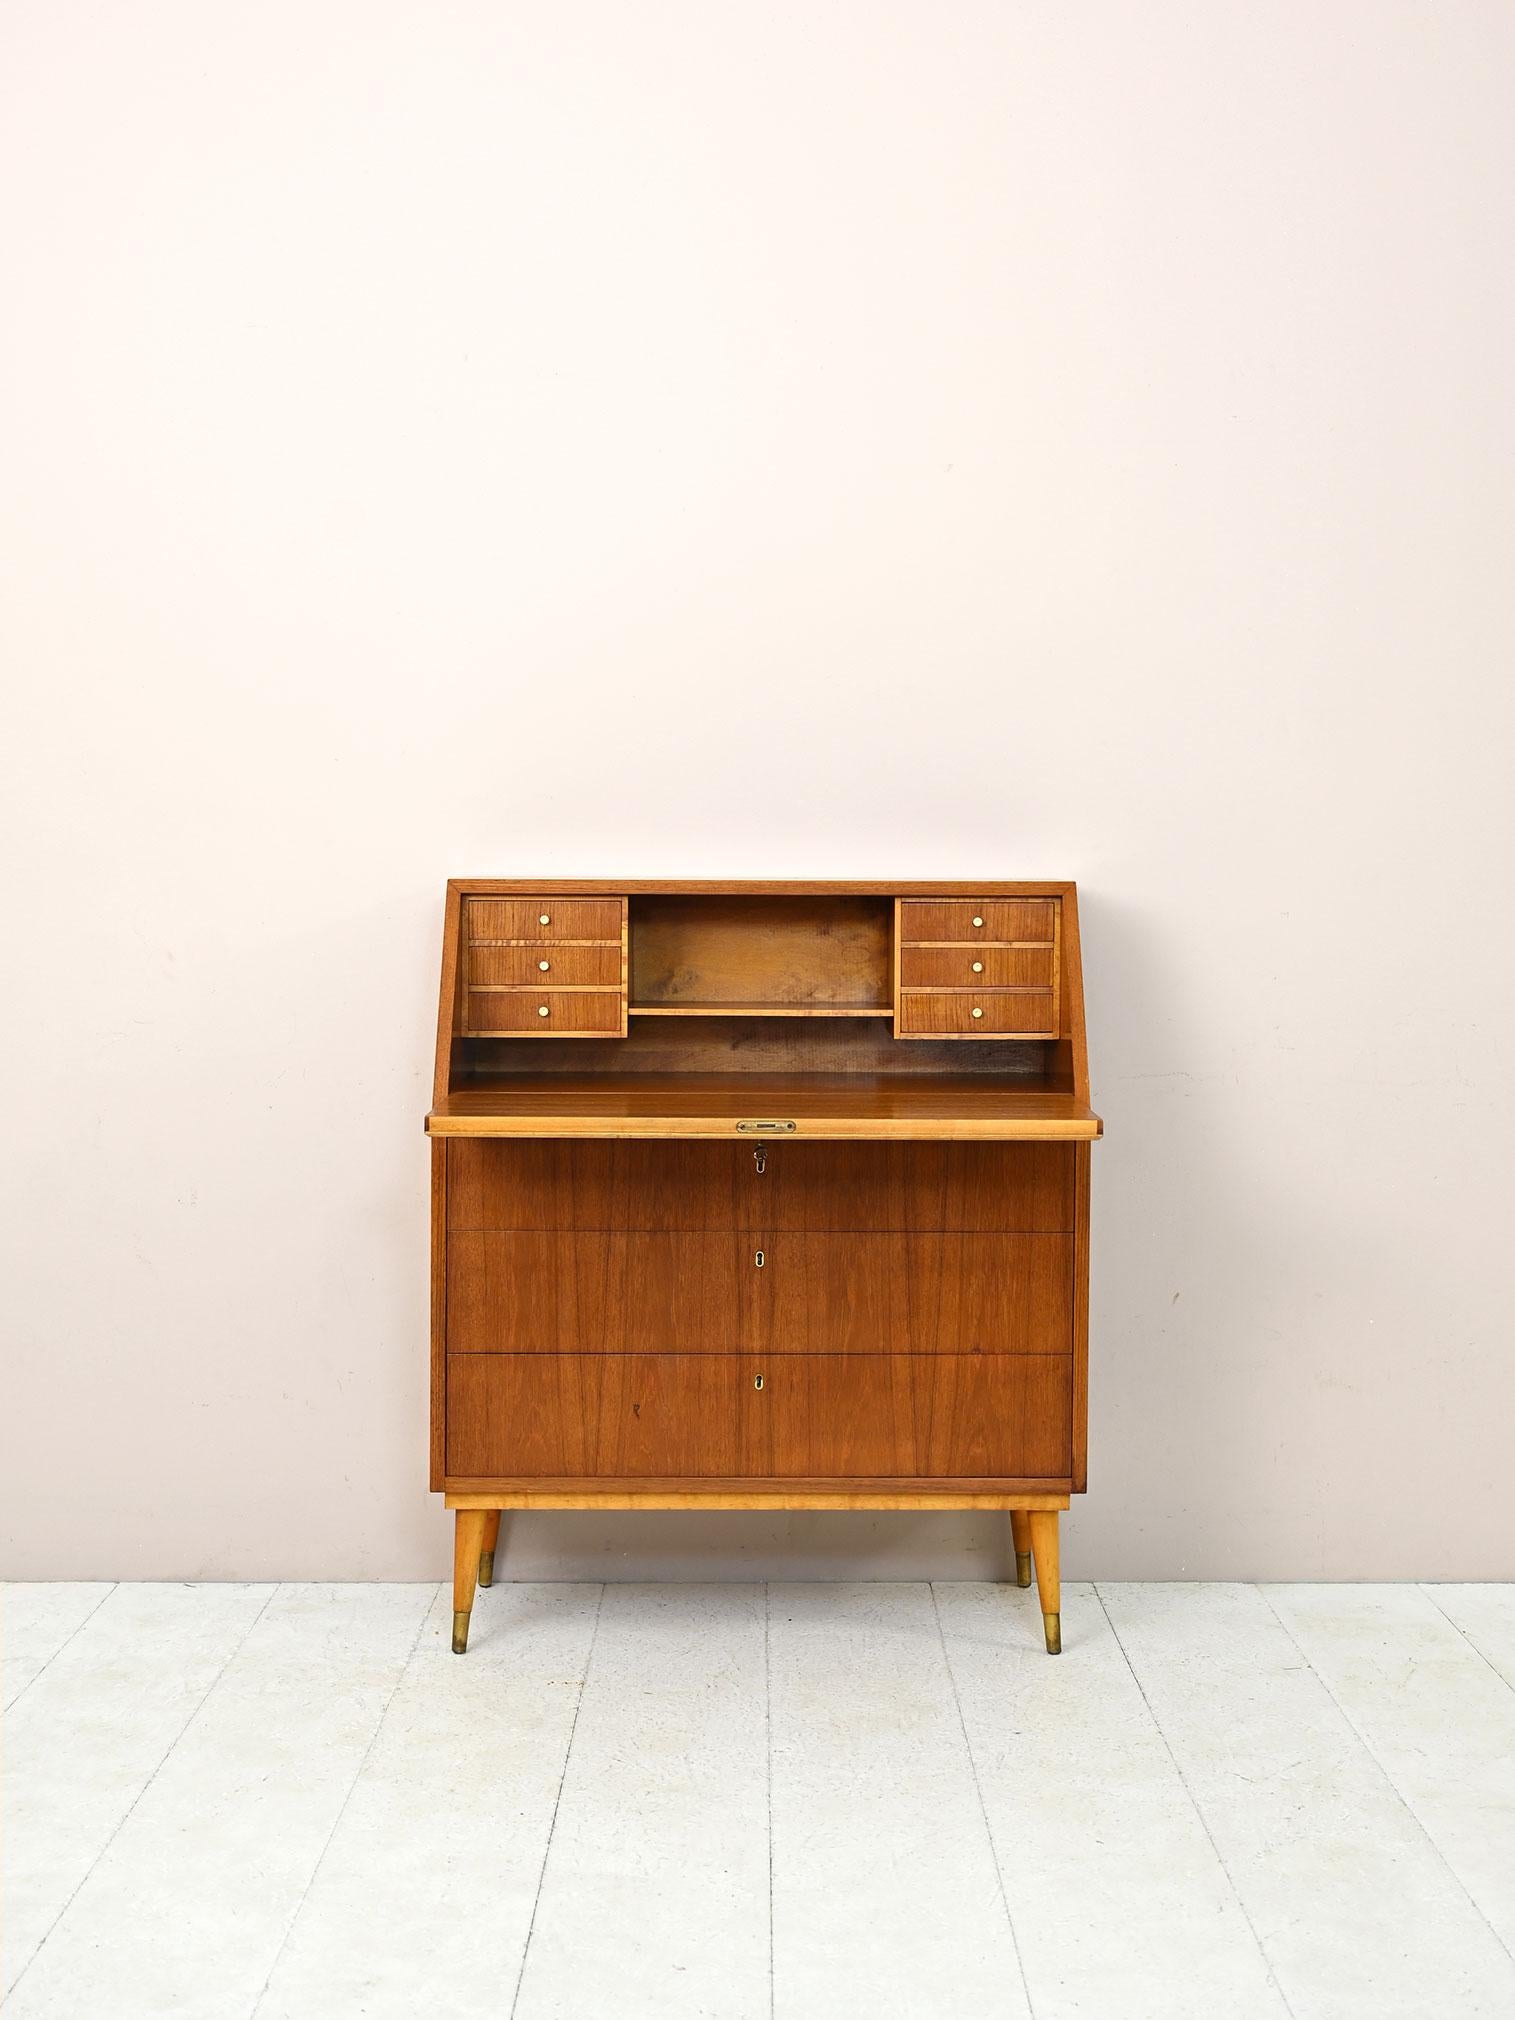 Scandinavian chest of drawers with fliptop.

A retro-flavored piece of furniture that traces midcentury taste.
Consisting of a teak frame with 3 drawers and a flap inside which are small drawers and a small shelf. 
Ideal for recreating a smart